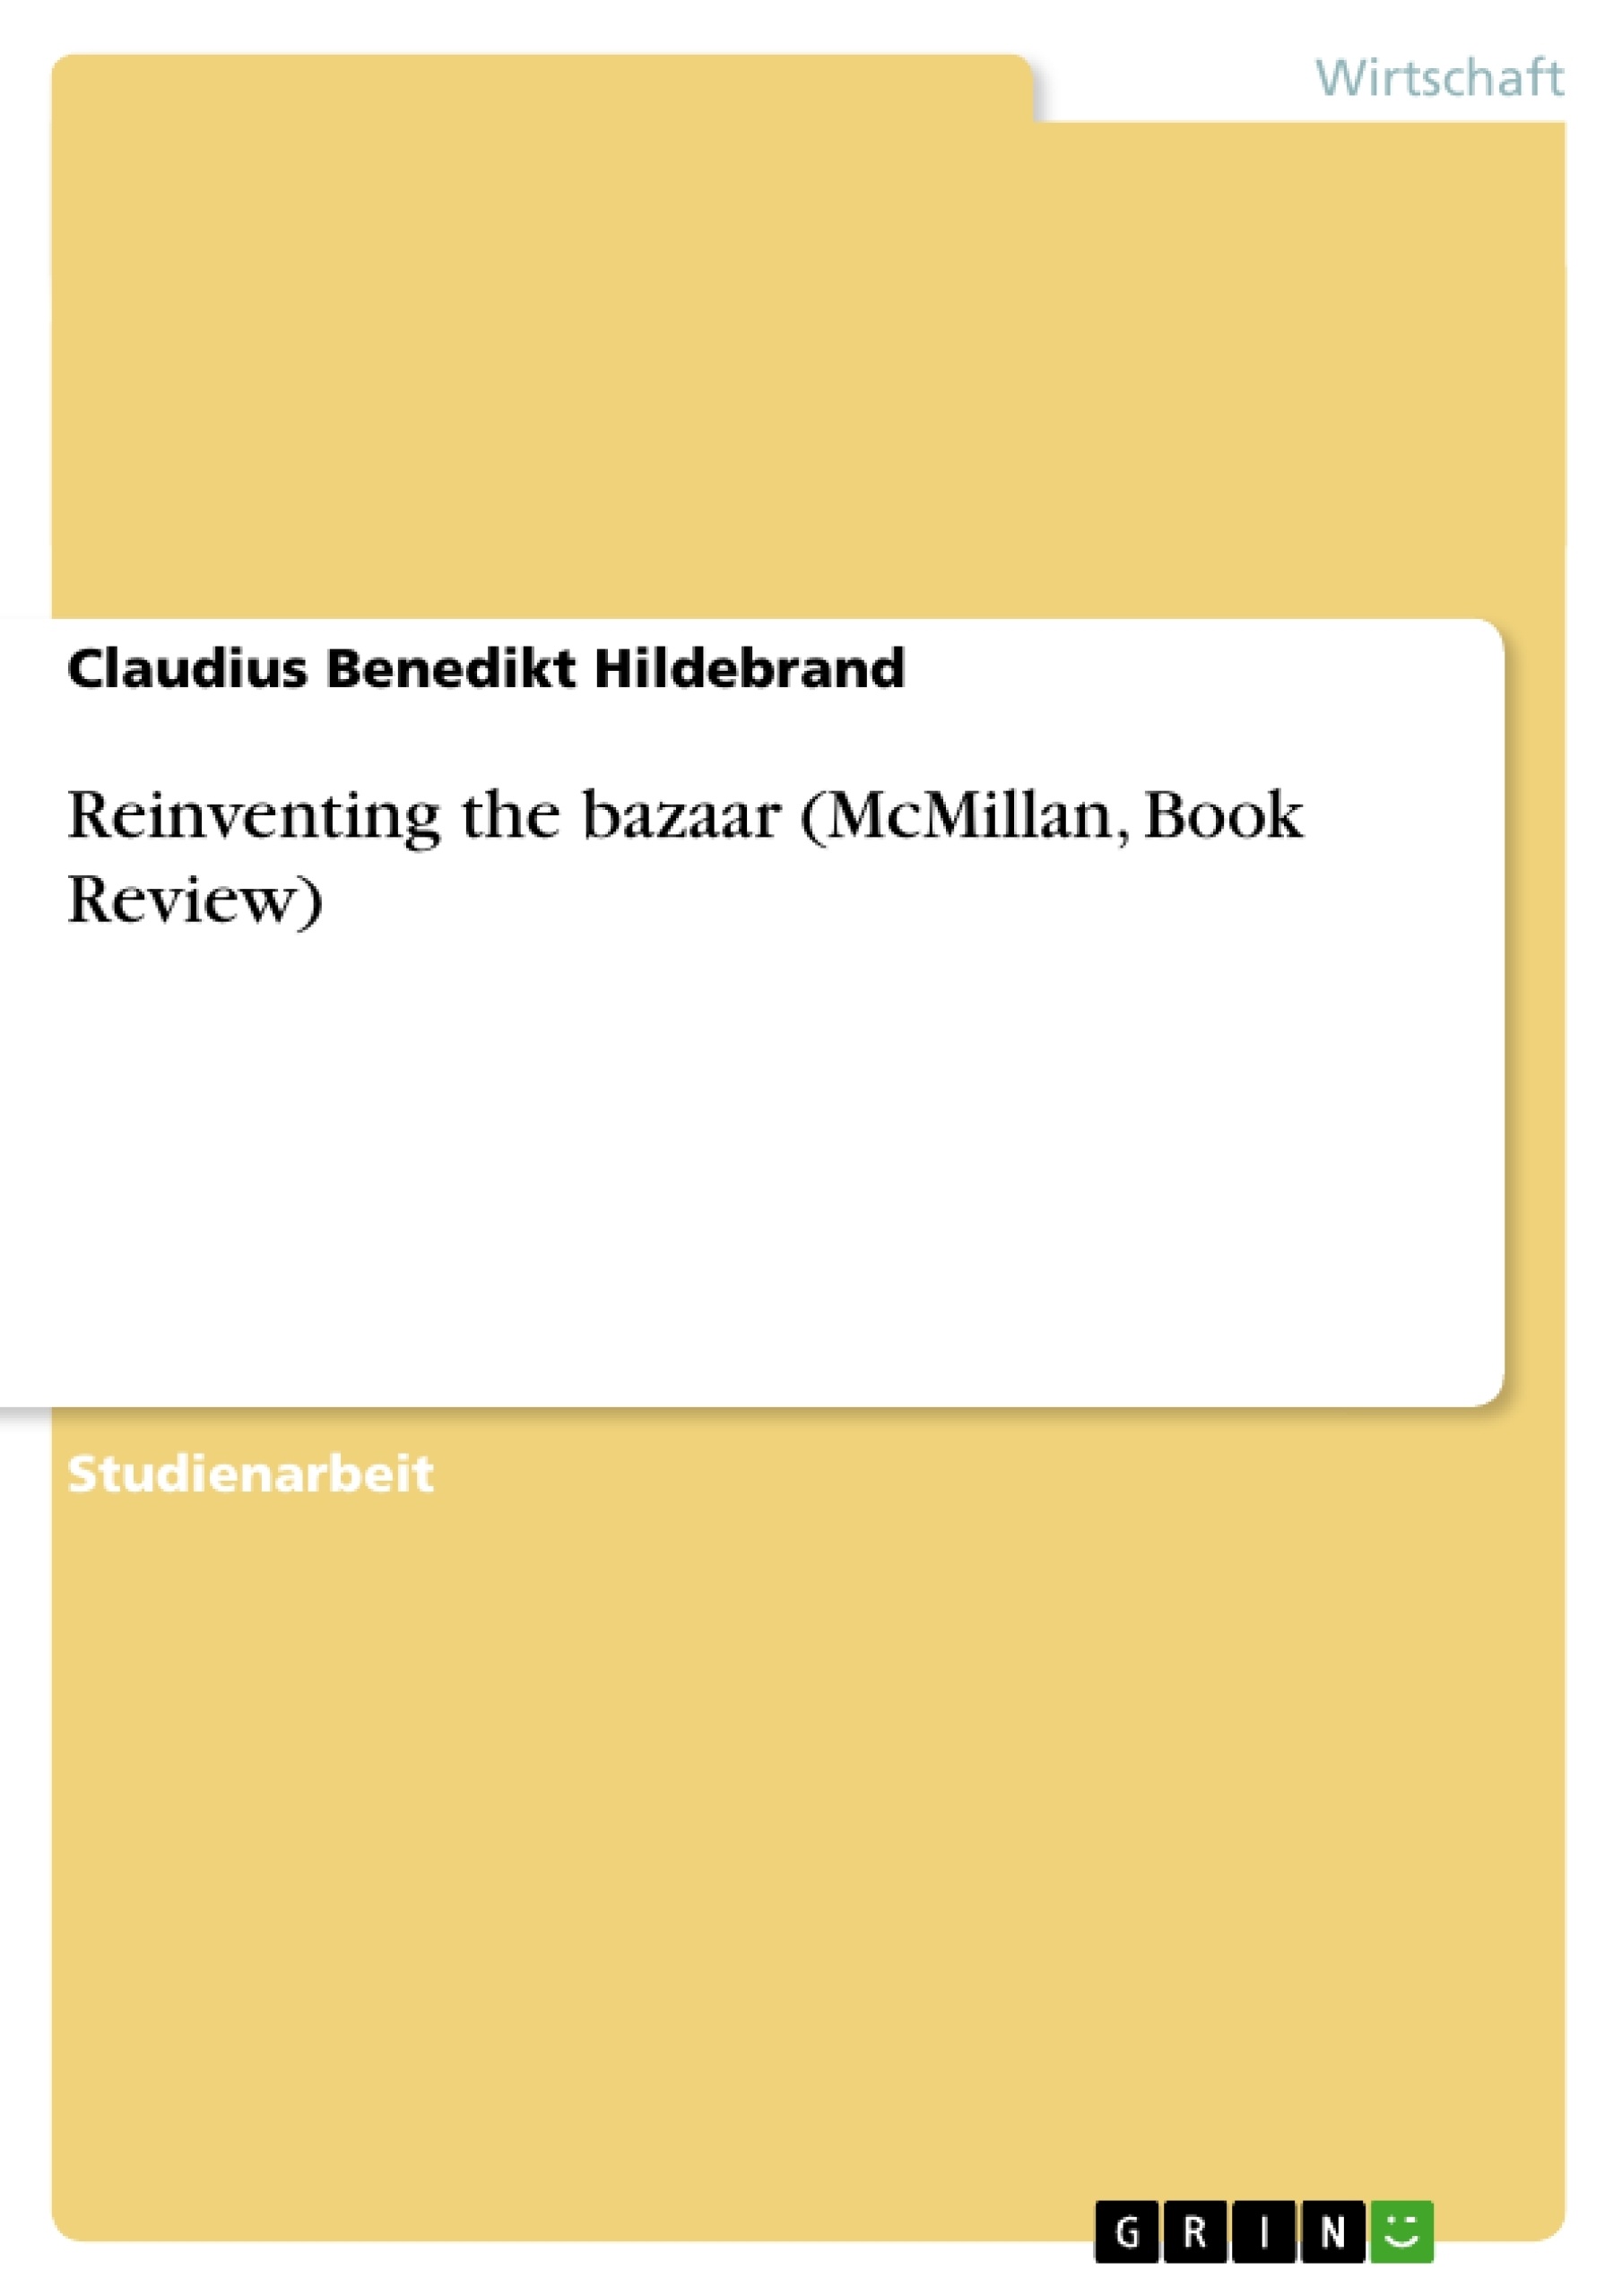 Title: Reinventing the bazaar (McMillan, Book Review)